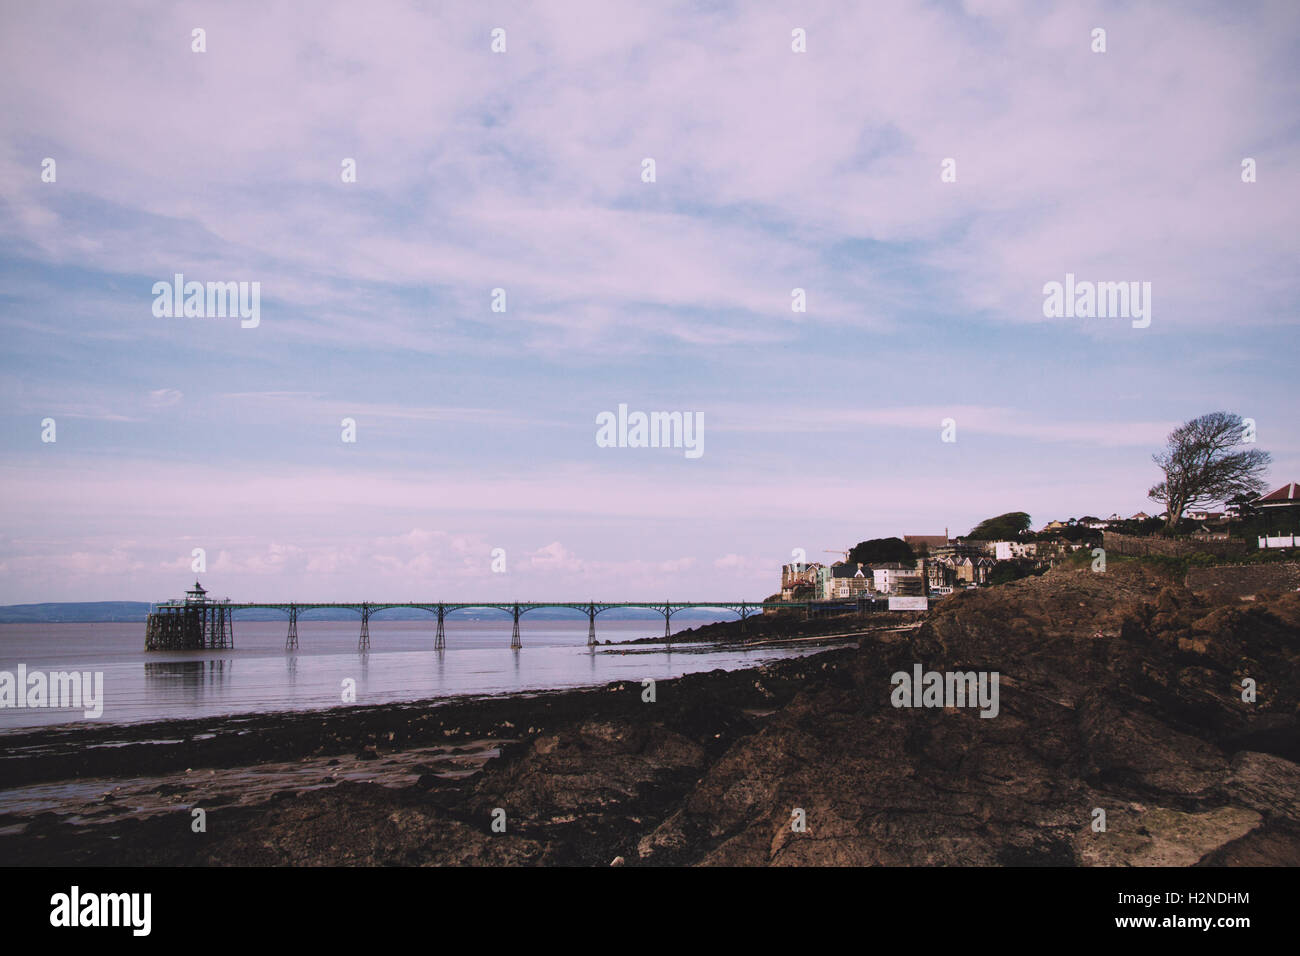 View over rocks at Clevedon sea front, including pier in background. Vintage Retro Filter. Stock Photo